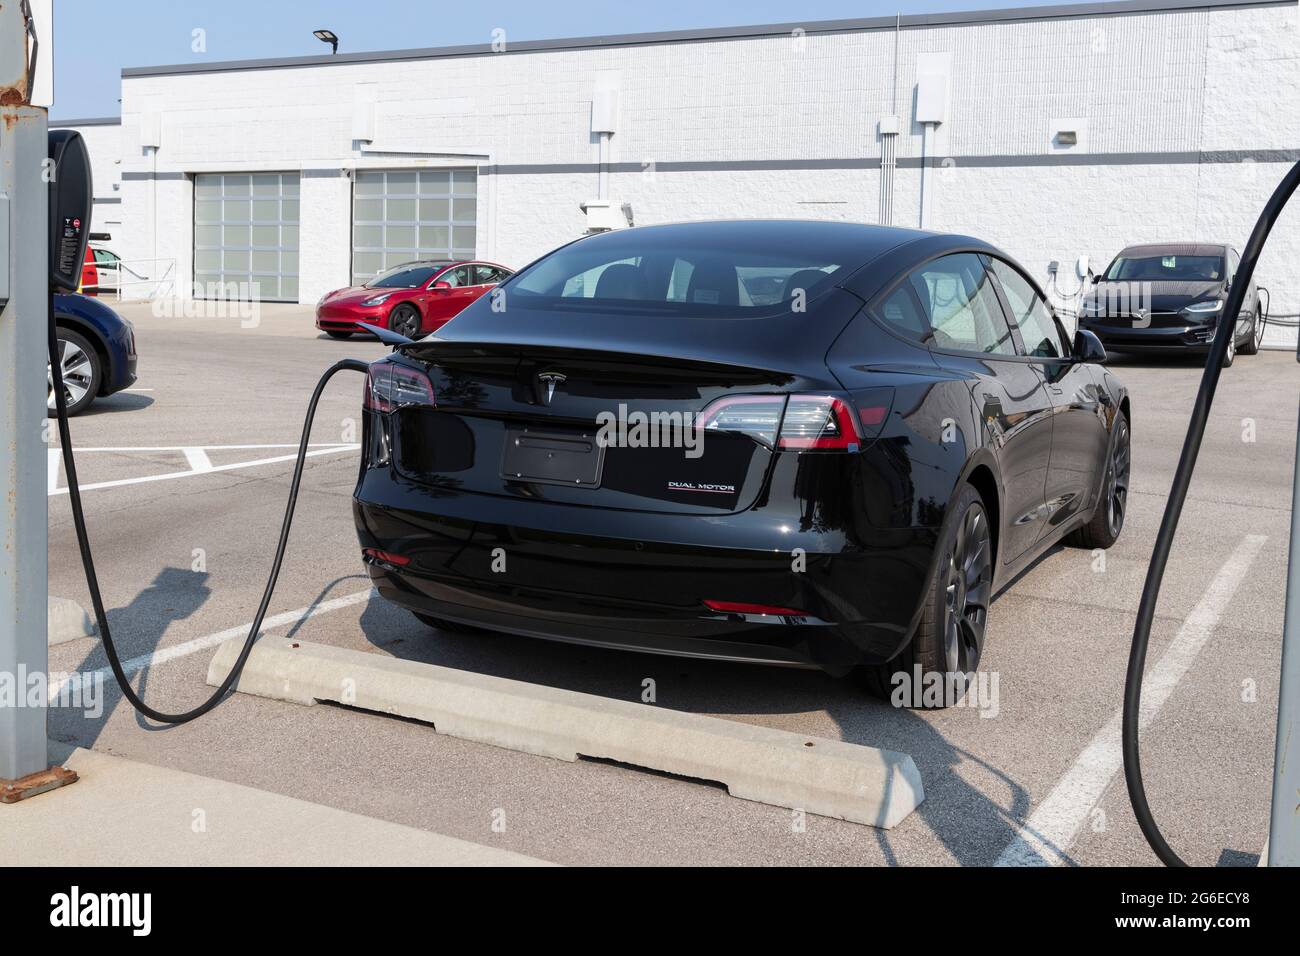 Indianapolis - Circa July 2021: Tesla electric vehicles awaiting preparation for sale. Tesla products include electric cars, battery energy storage an Stock Photo